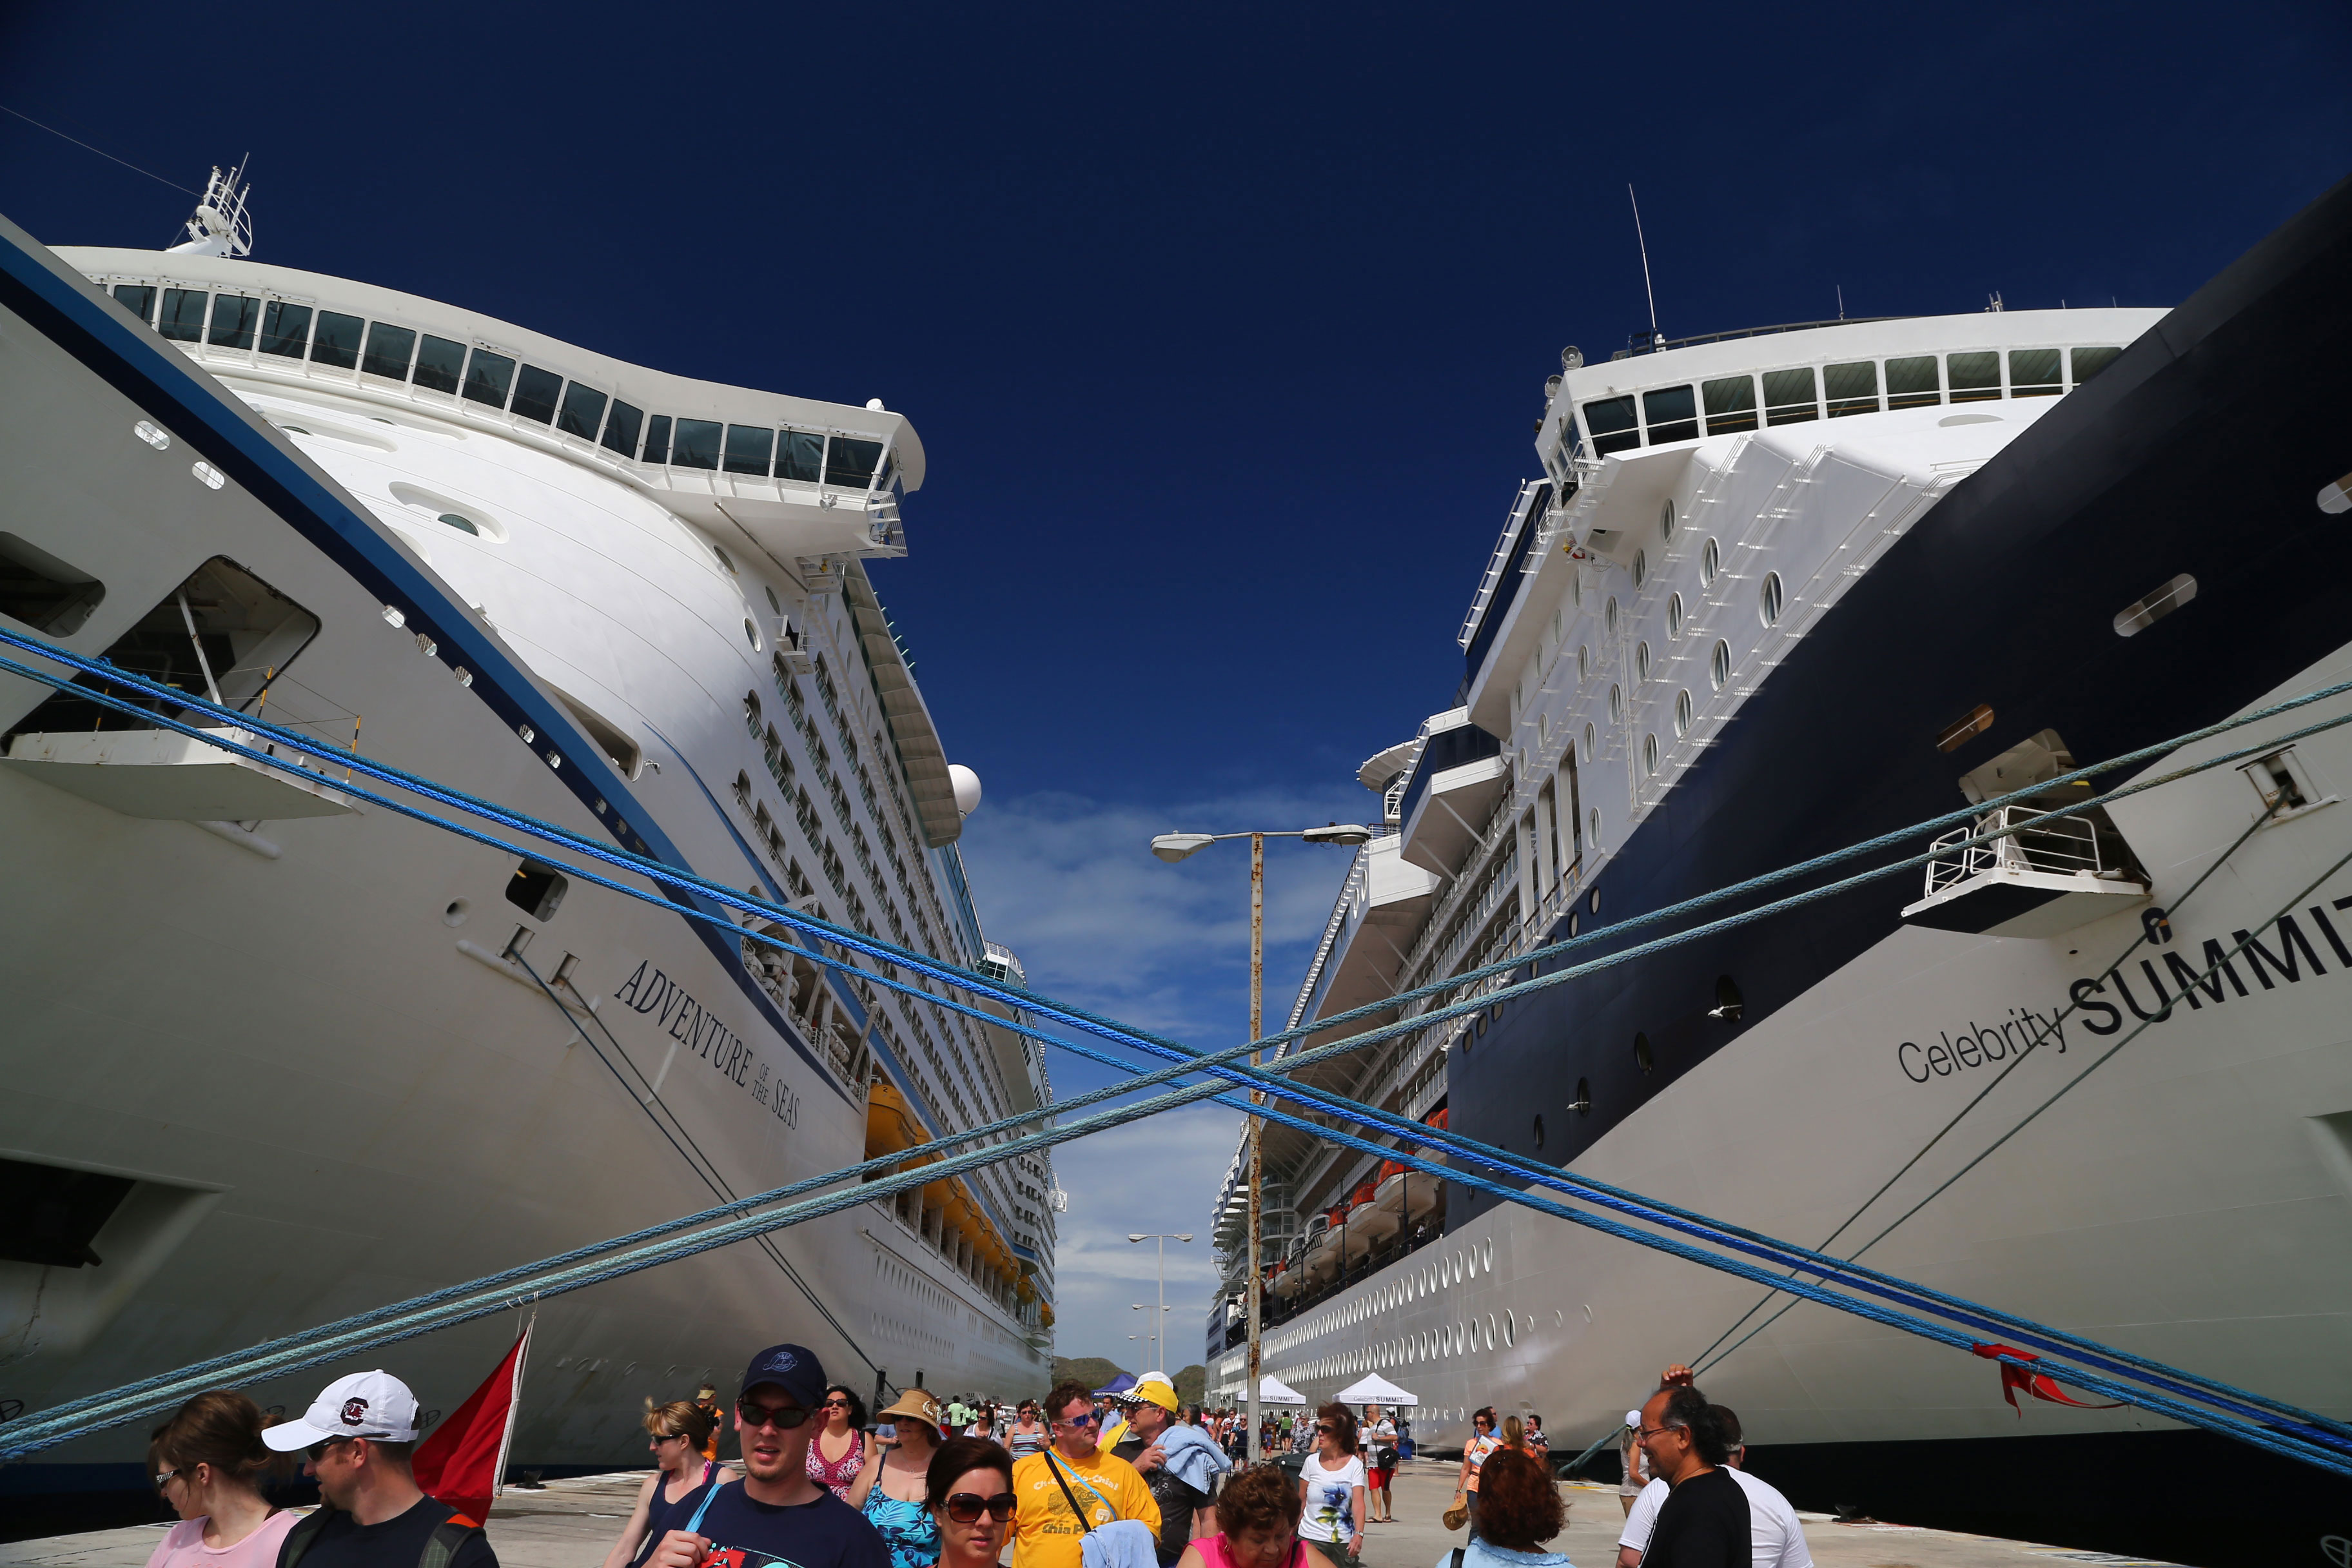 The Celebrity 'Summit' on the right hand side makes port next to the 'Adventure of the Seas' in St. Maarten